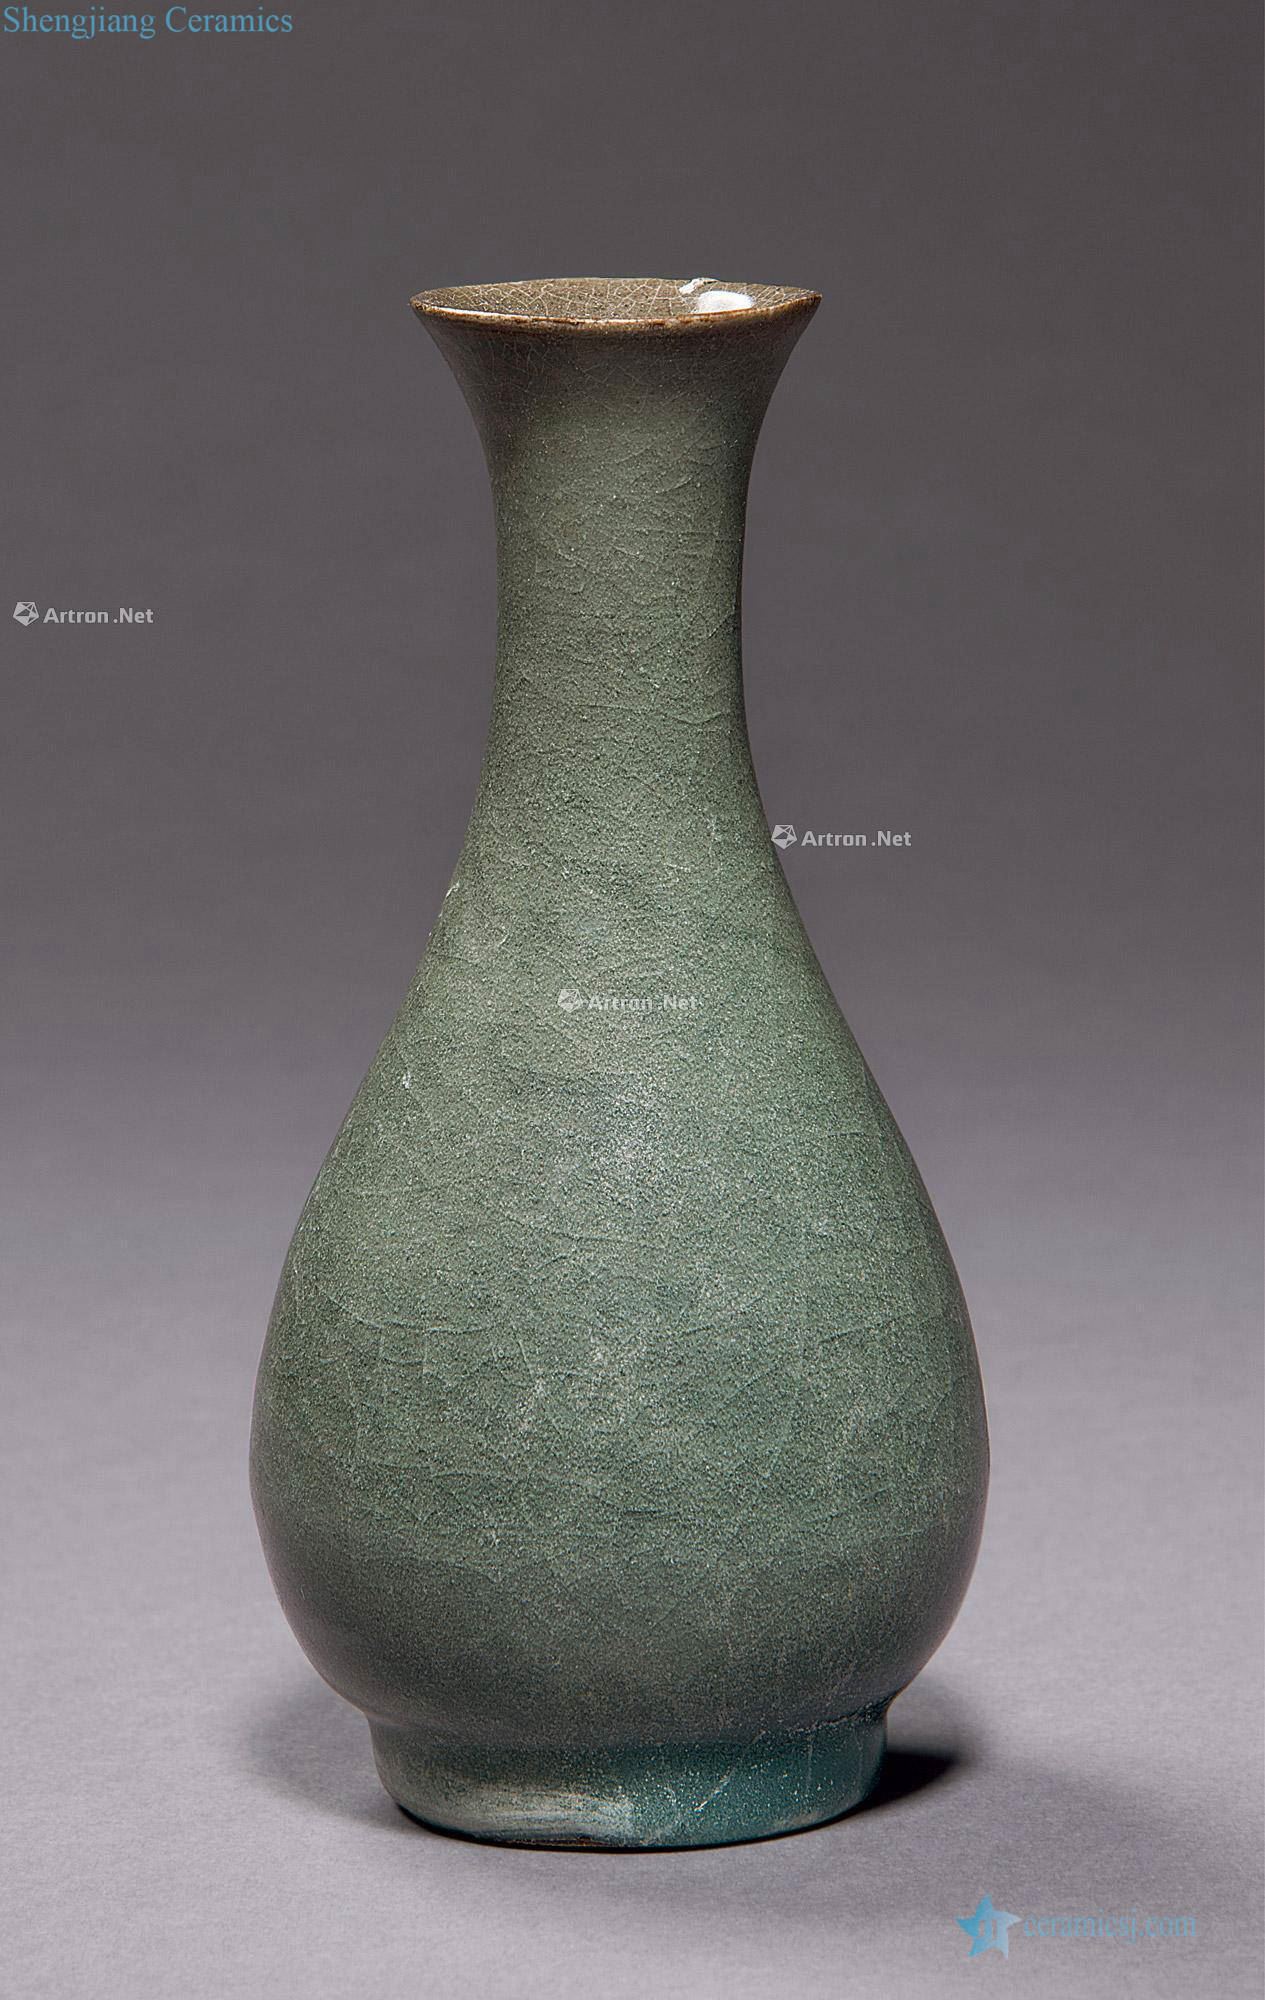 The song dynasty Longquan celadon state gall bladder